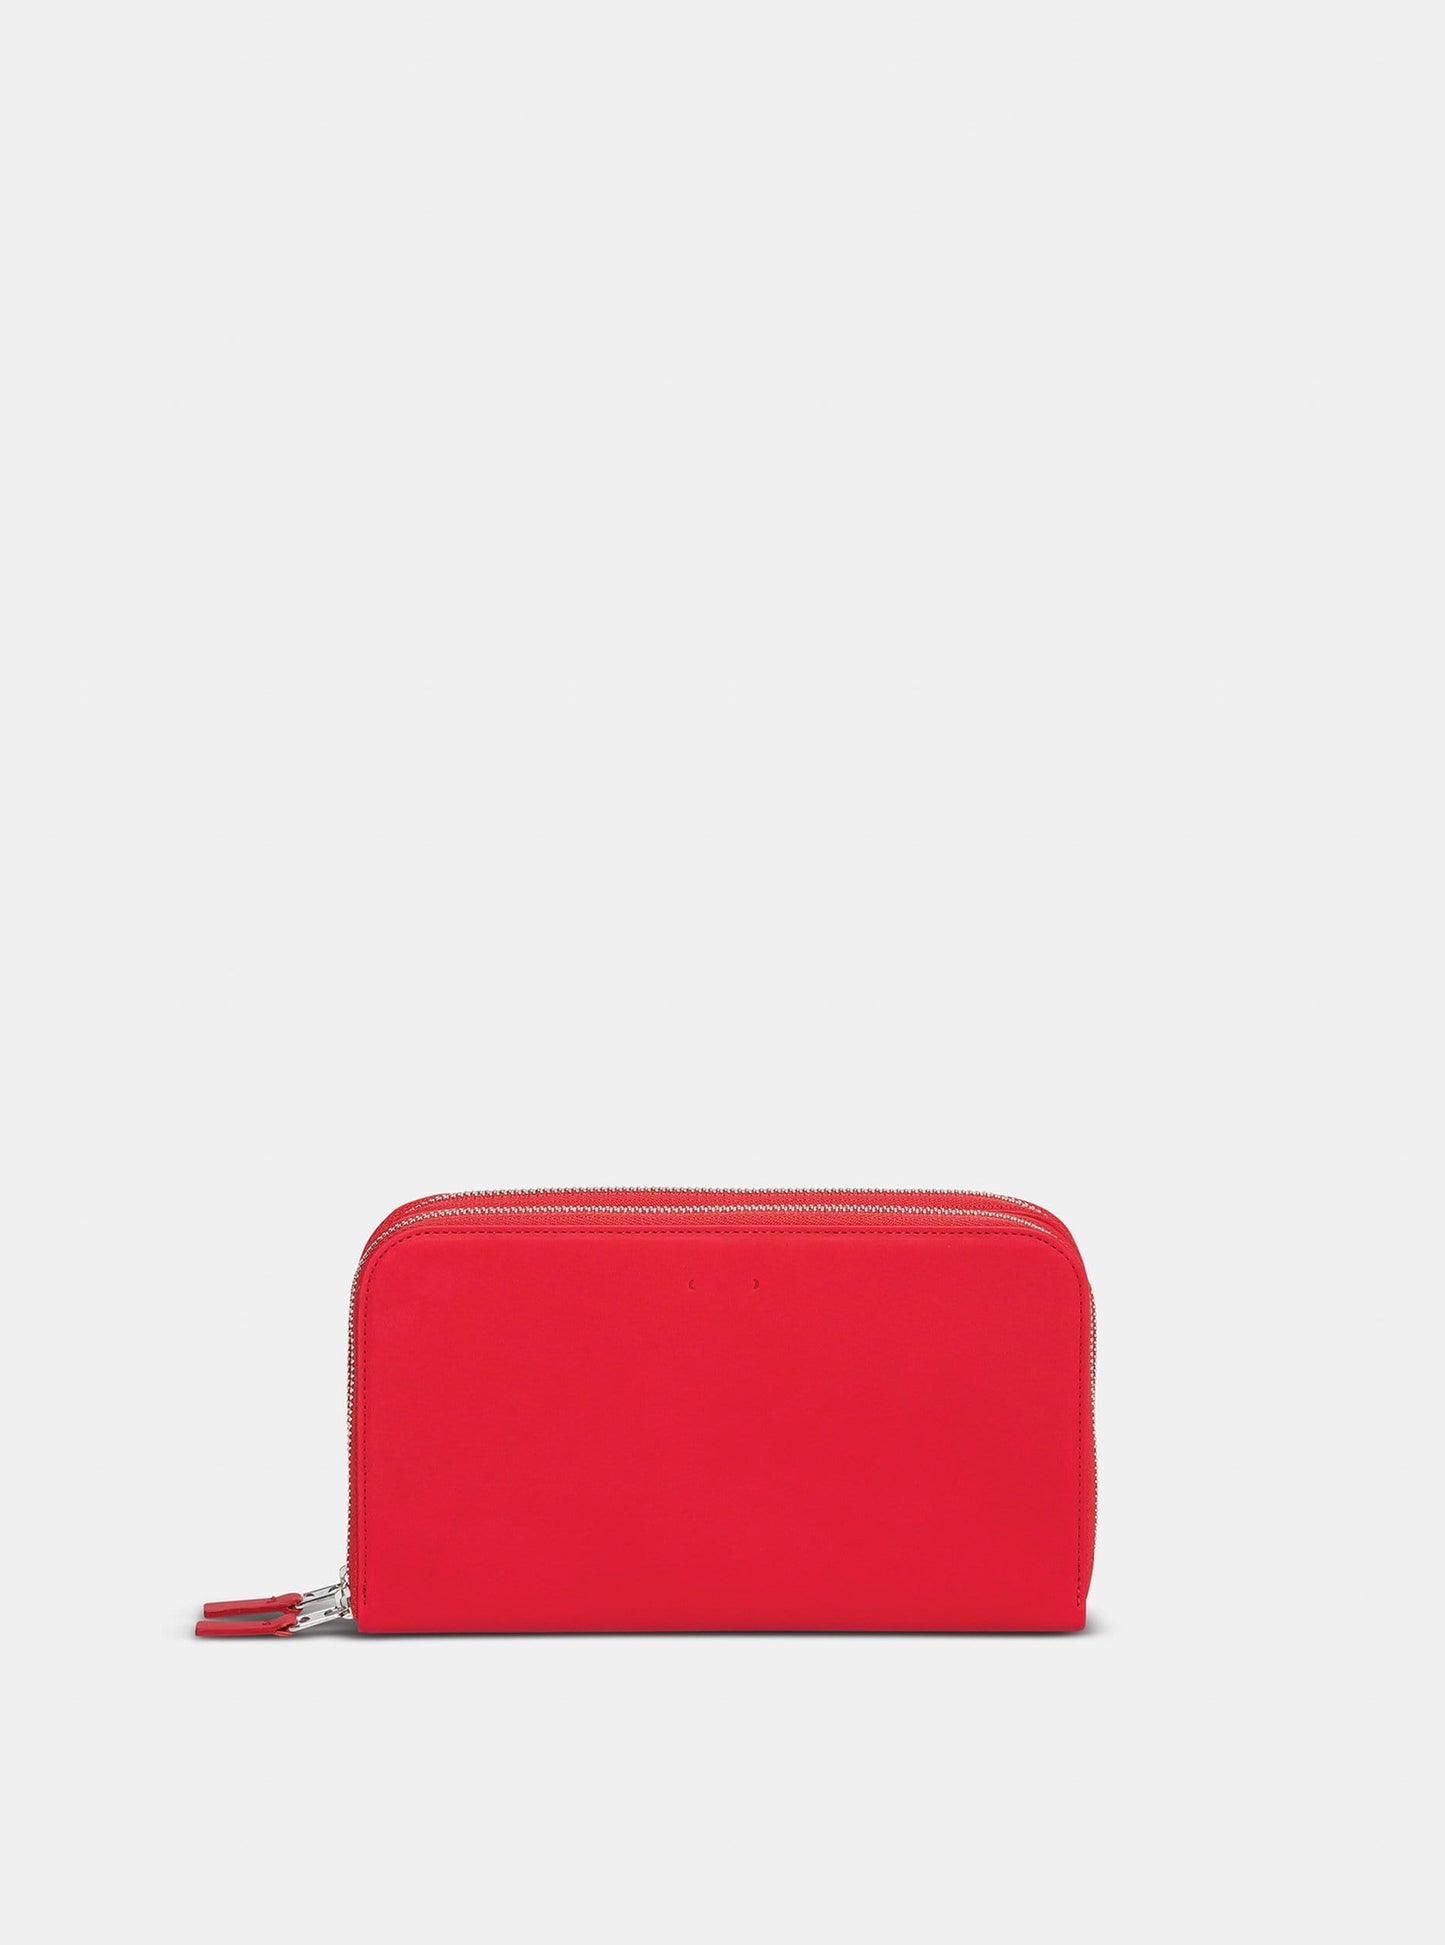 Red wallet of PB 0110